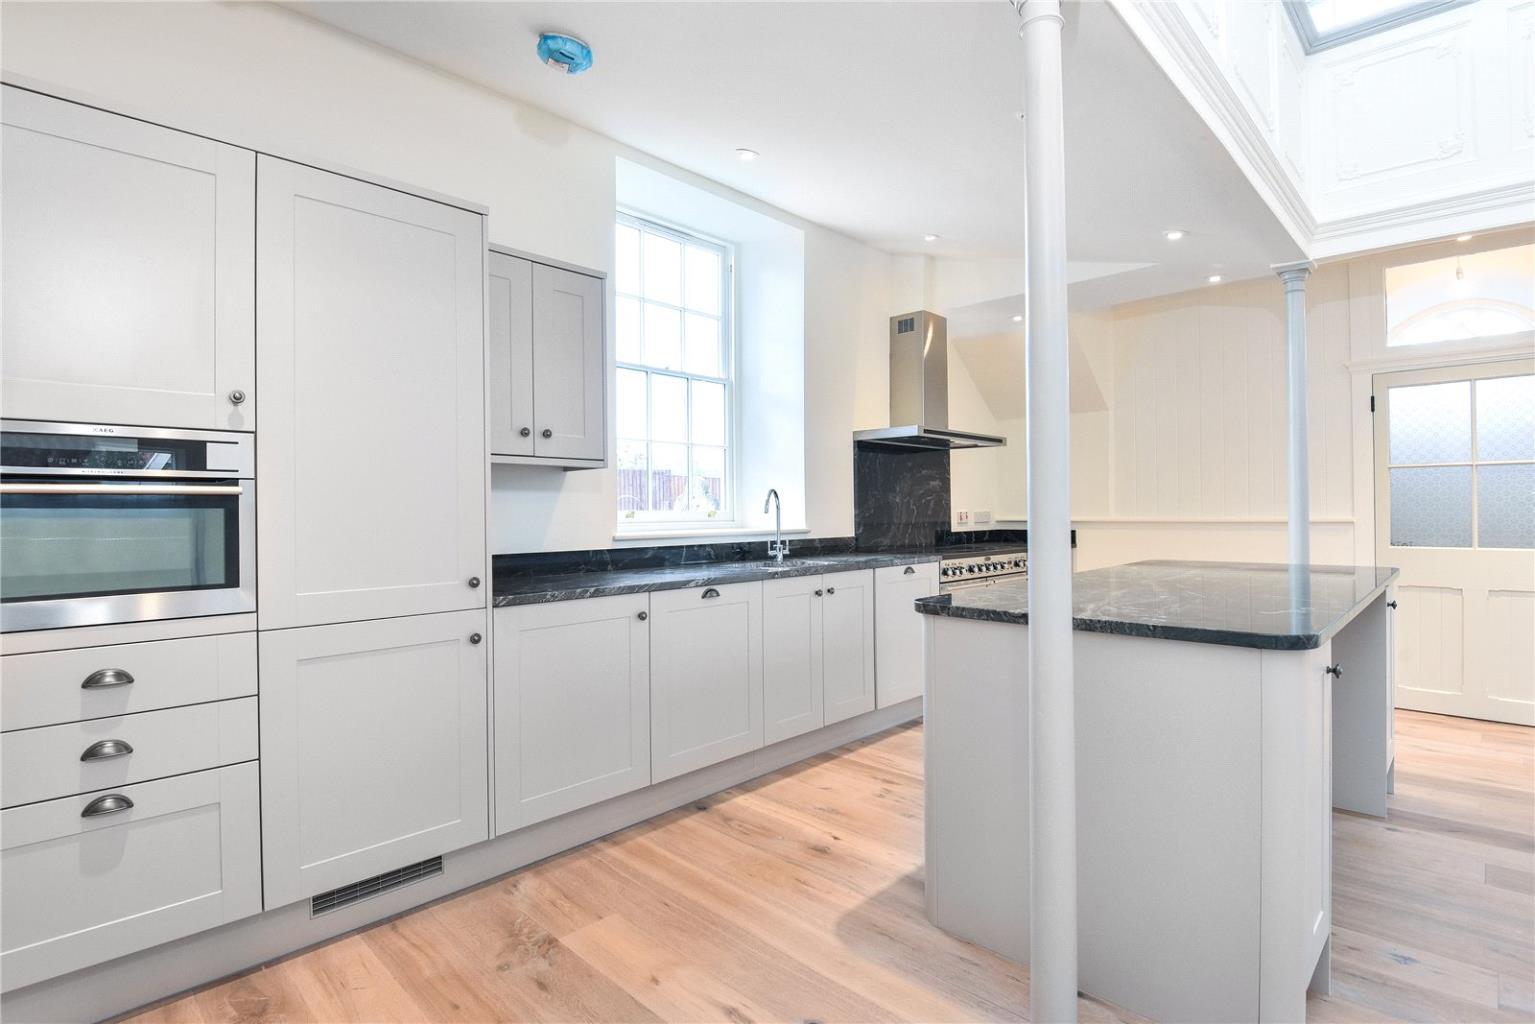 The house is immaculate throughout and even has a brand new kitchen. Image: Bedford Estate Agents 